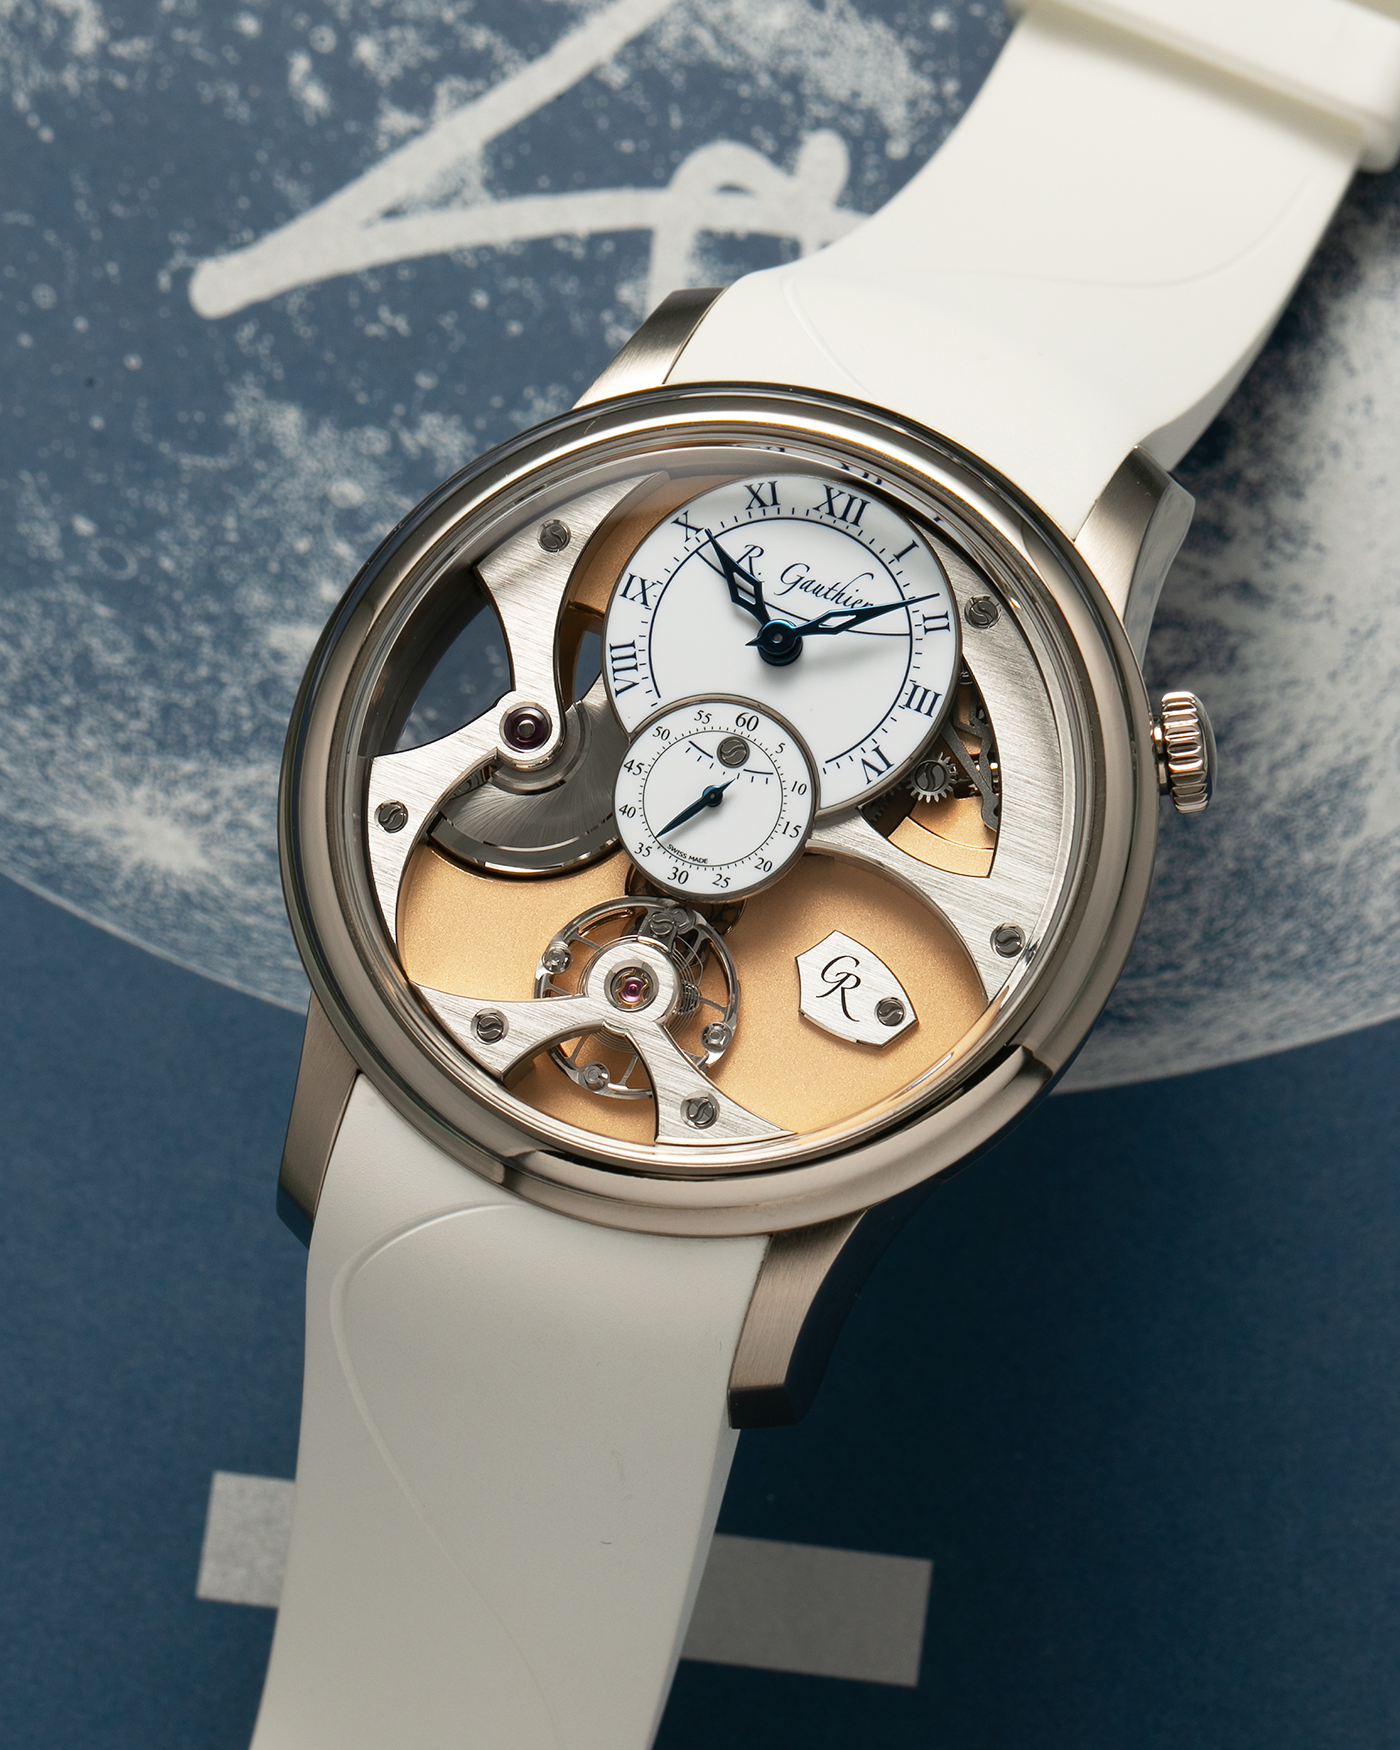 Brand: Romain Gauthier Year: 2023 Model: Insight Micro-Rotor, Limited Edition of 10 Pieces in this Configuration Reference Number: MON00360 Material: 18-carat White Gold Case, Oven-Fired Grand Feu White Enamel Dial Movement: Romain Gauthier Insight Micro-Rotor Caliber, Self-Winding Case Dimensions: 39.5mm x 12.9mm Strap: Romain Gauthier White Rubber Strap with Signed 18-carat White Gold Tang Buckle and Additional Romain Gauthier Brown Alligator Strap